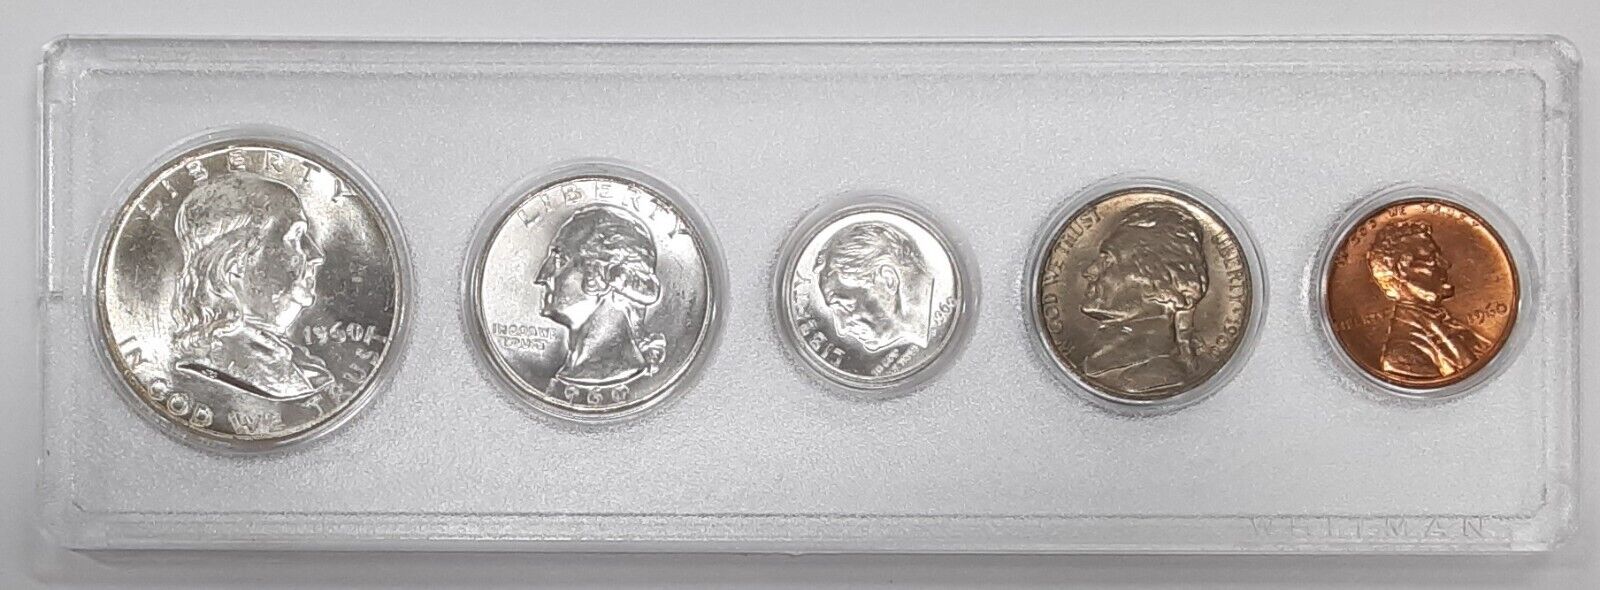 1960 US Uncirculated Year Set with Silver Half Quarter and Dime 5 Coins Total